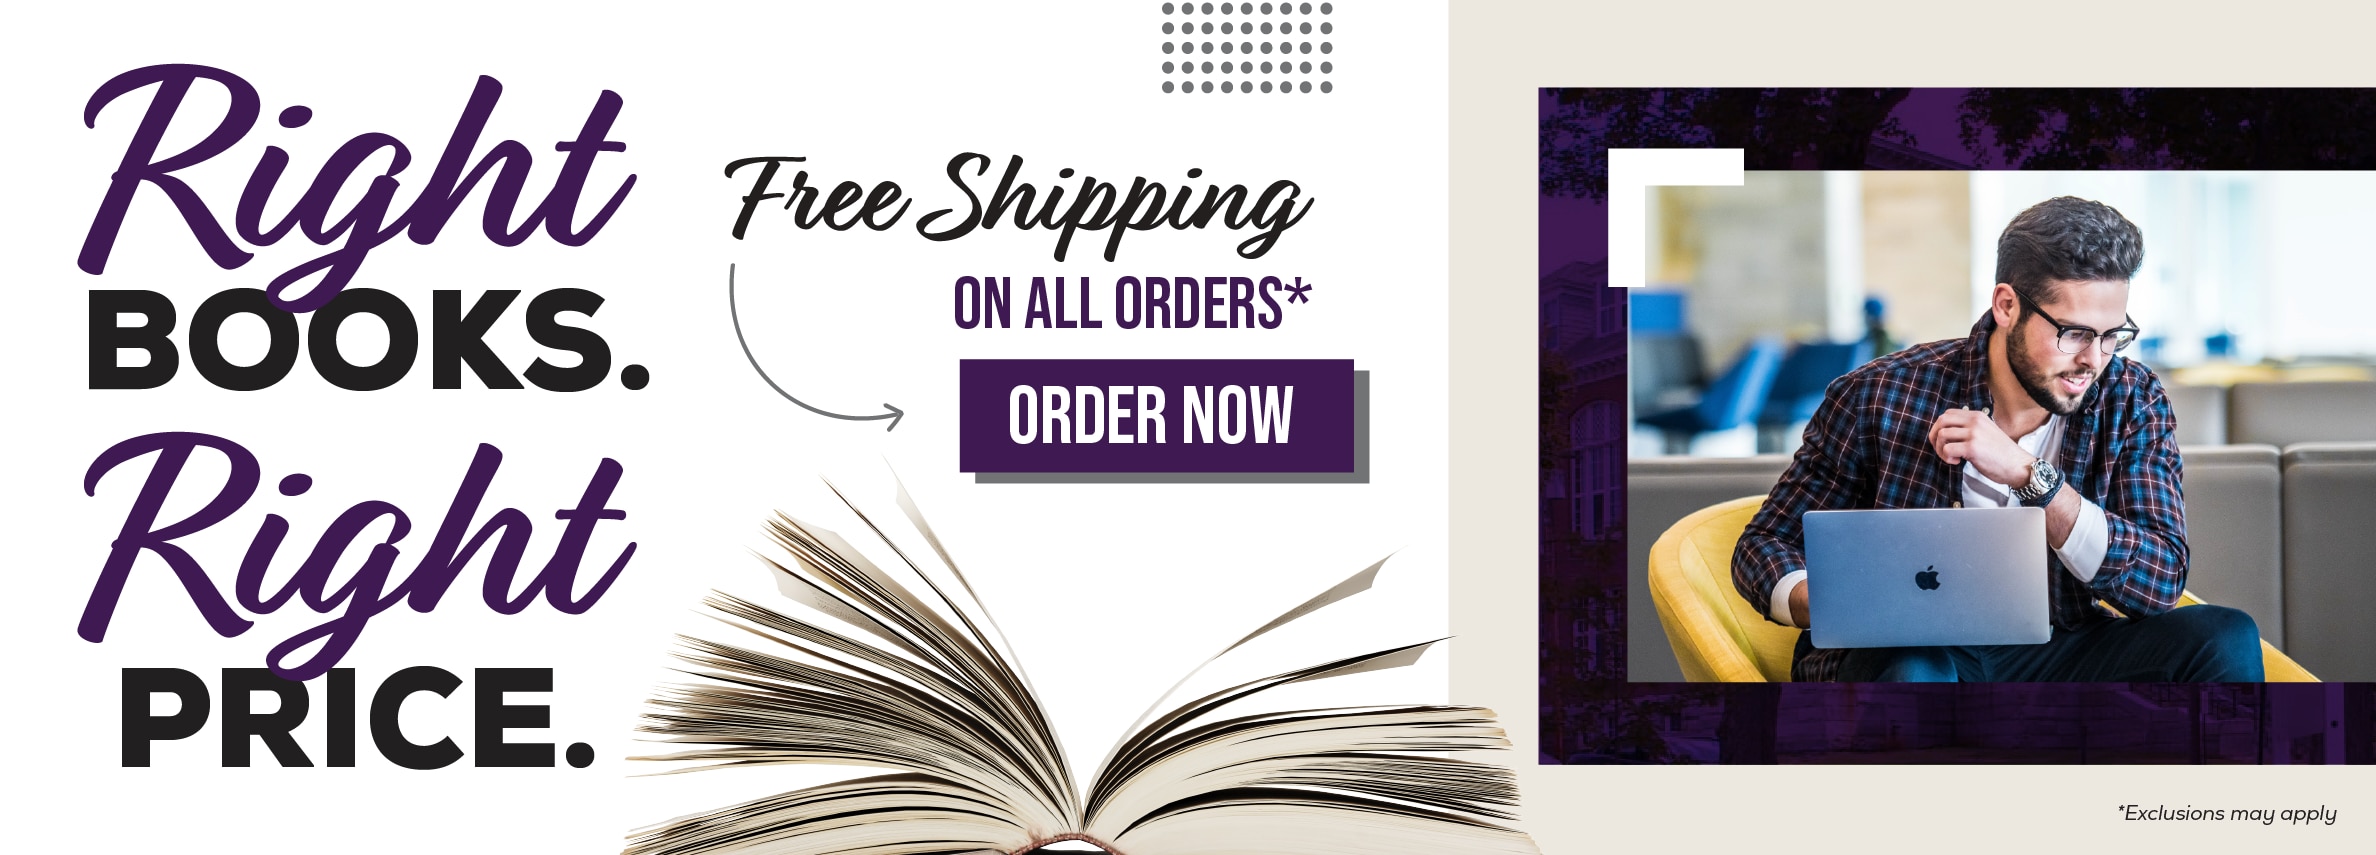 Right books. Right price. Free shipping on all orders.* Order now. *Exclusions may apply.